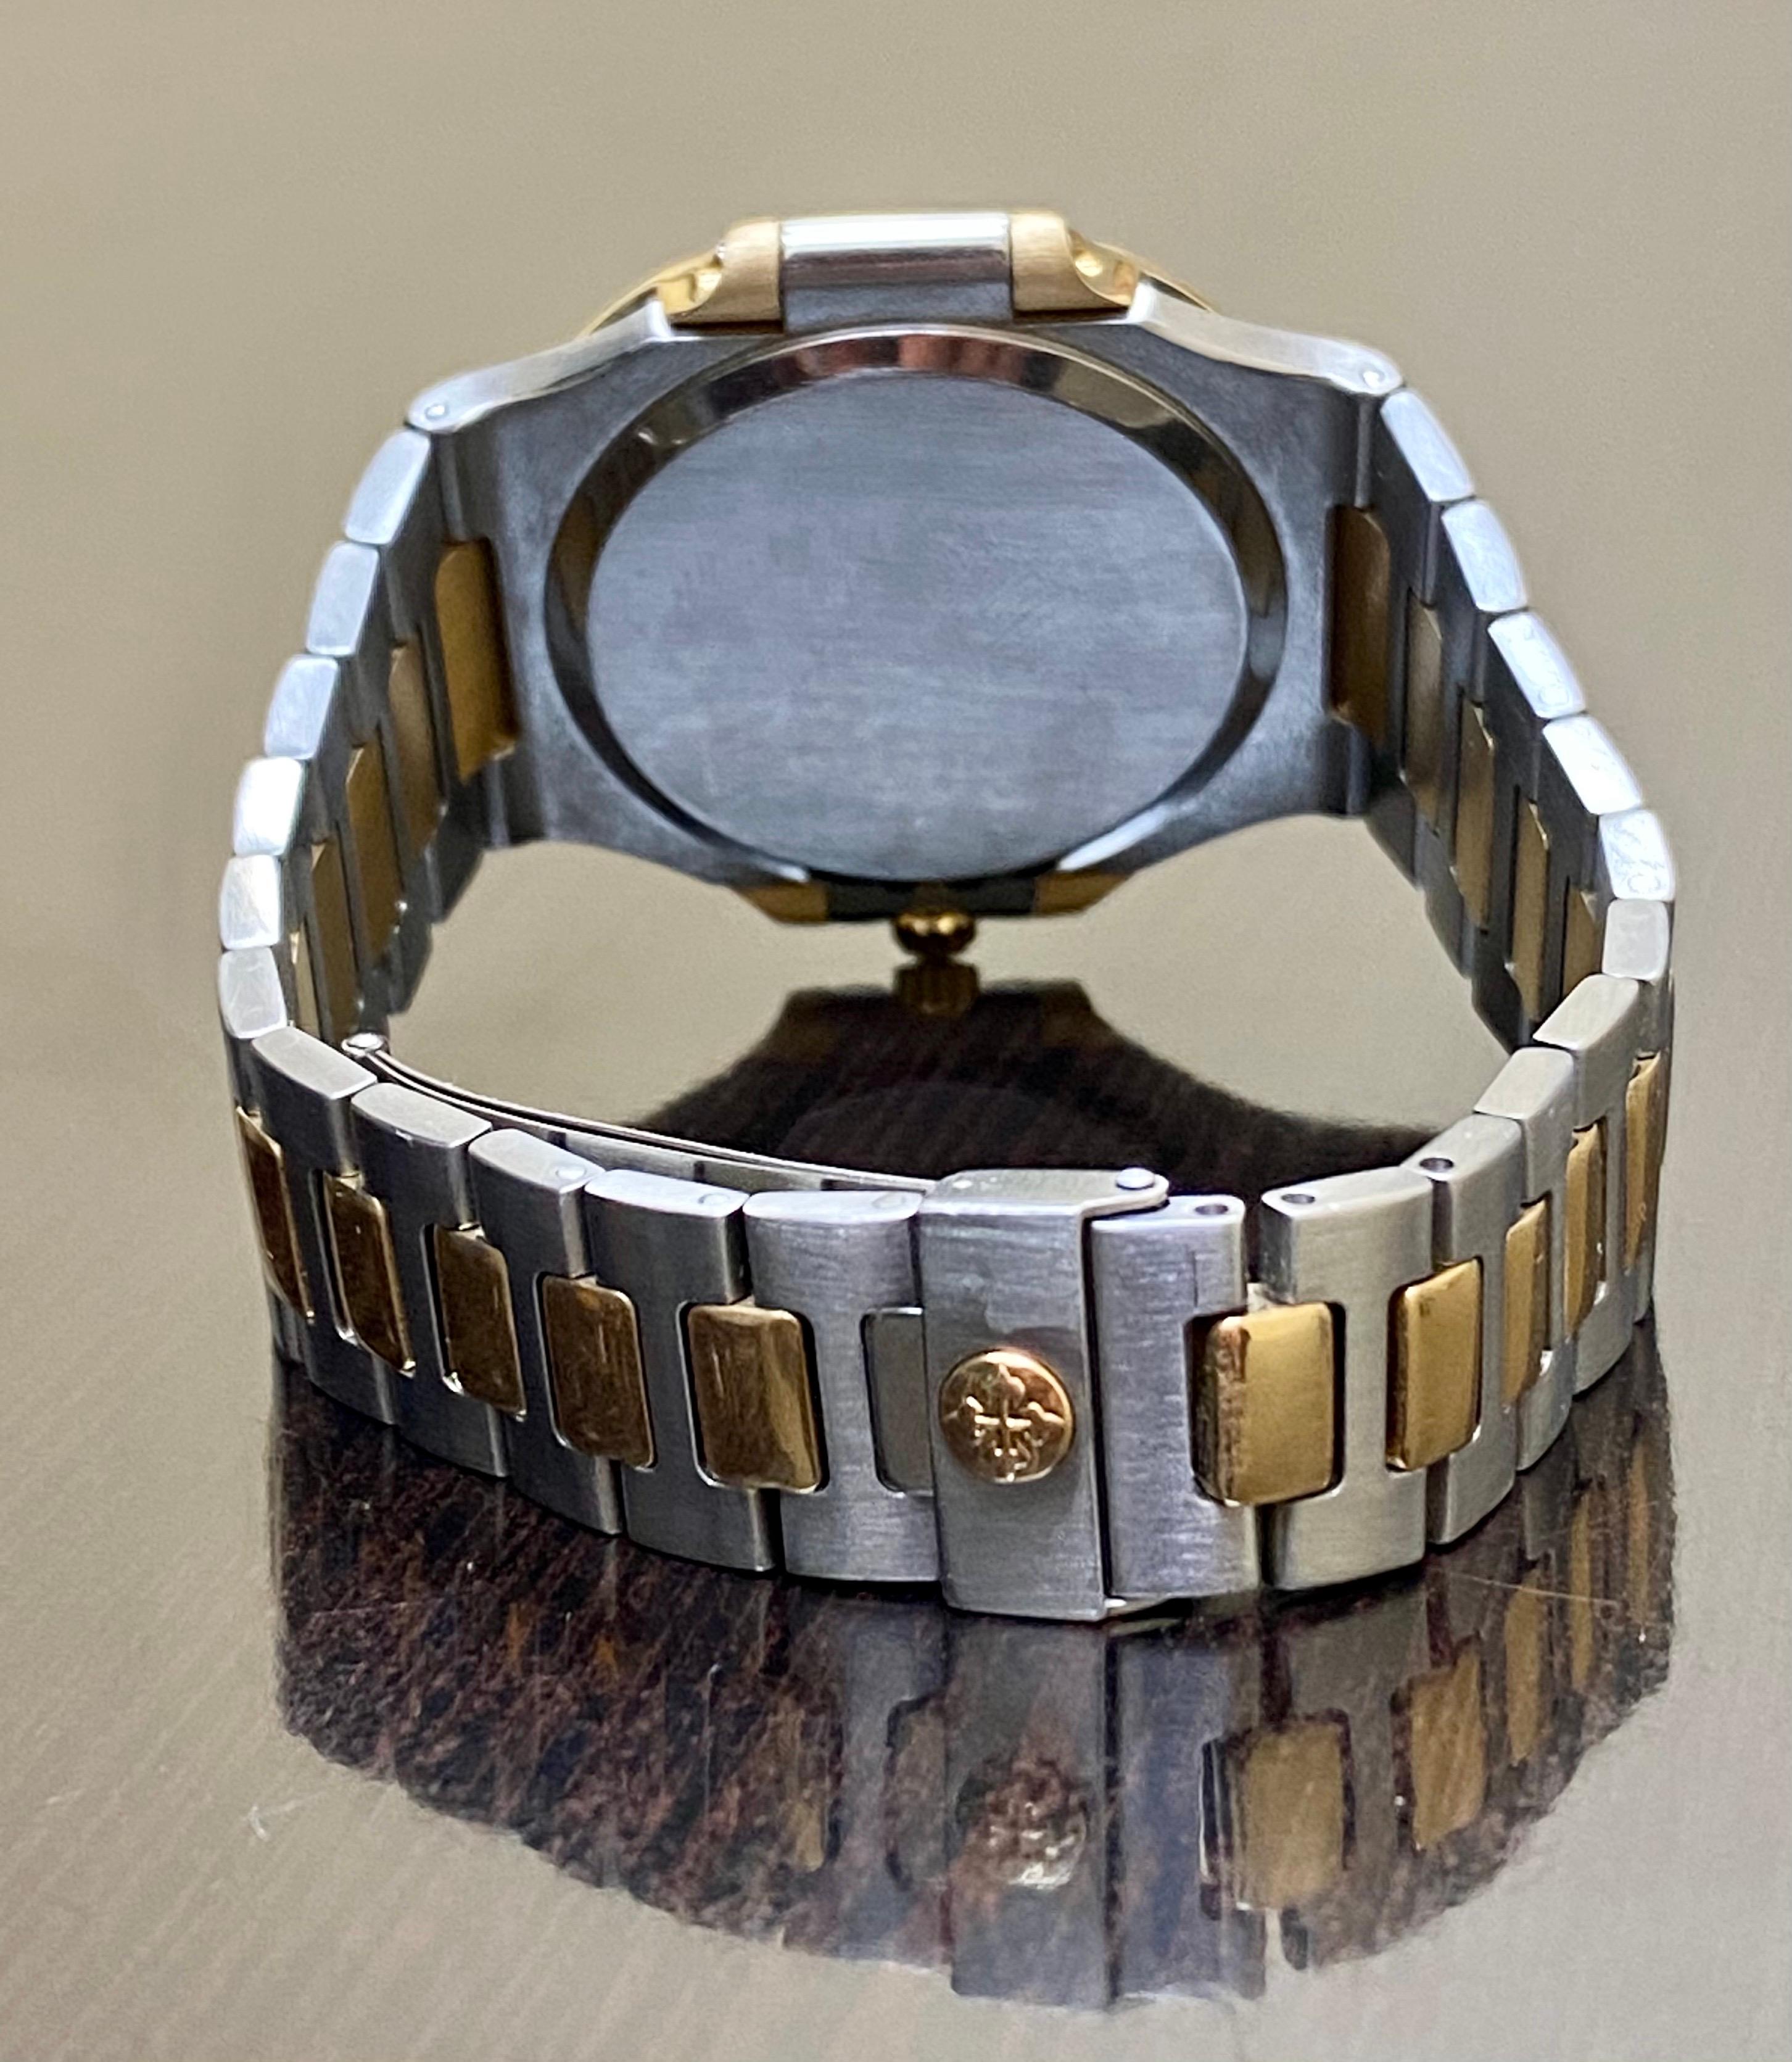 Exceptionally Rare Vintage Patek Philippe Two-Tone Stainless Steel and 18K Yellow Gold Champagne Dial 3700/11 Nautilus offered here for sale.  It is preserved in very good overall condition, with original papers.  Watch has been recently overhauled